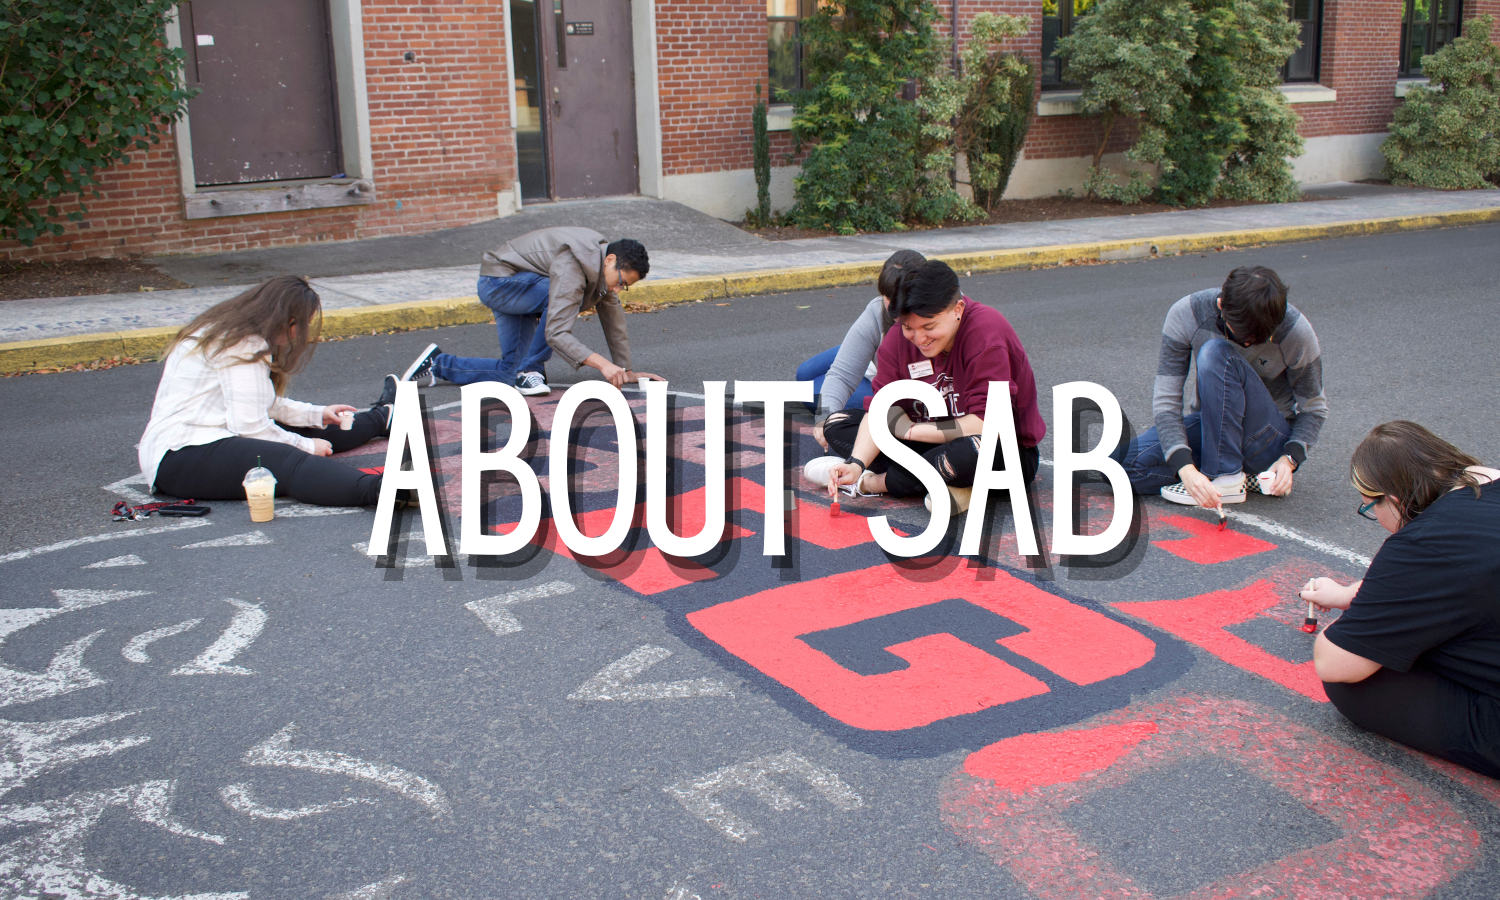 A group of students painting the WOU logo on the road. The words "About SAB" are superimposed over the students.